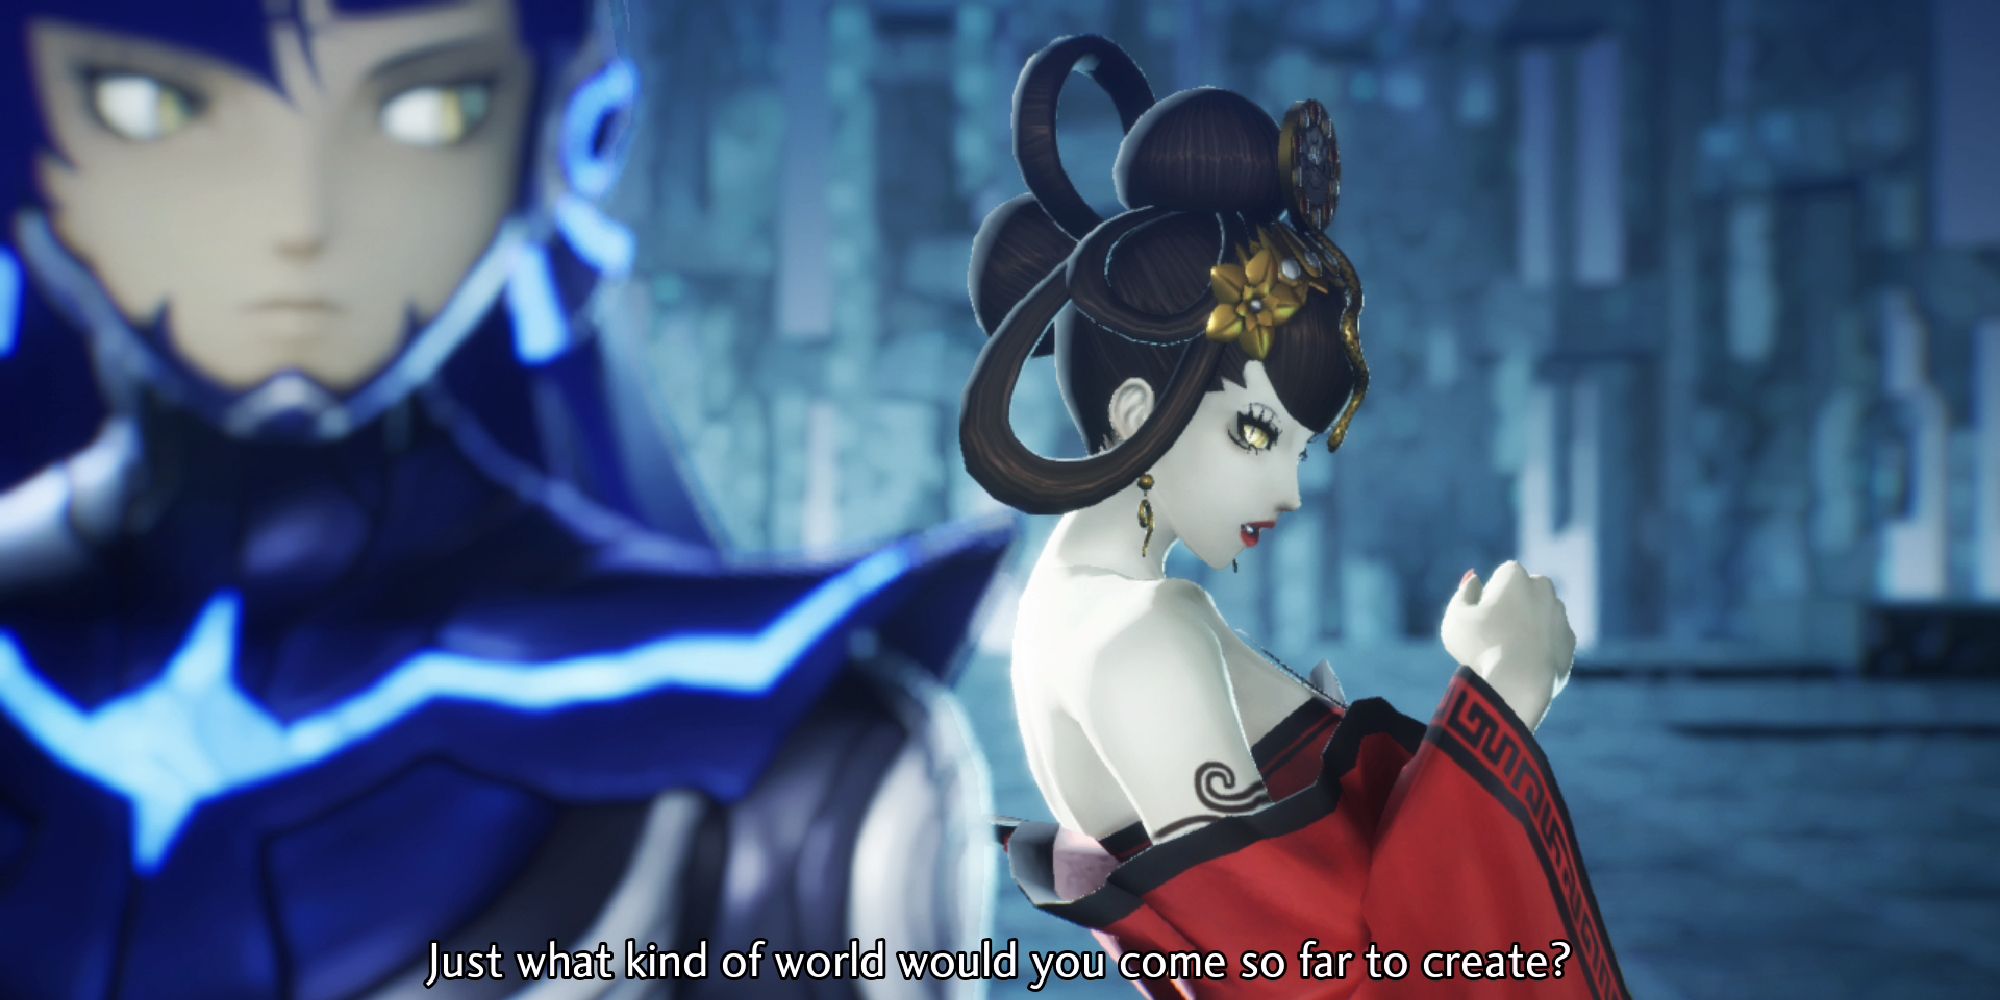 A demon asks the Nahobino what kind of world they want to create in Shin Megami Tensei 5